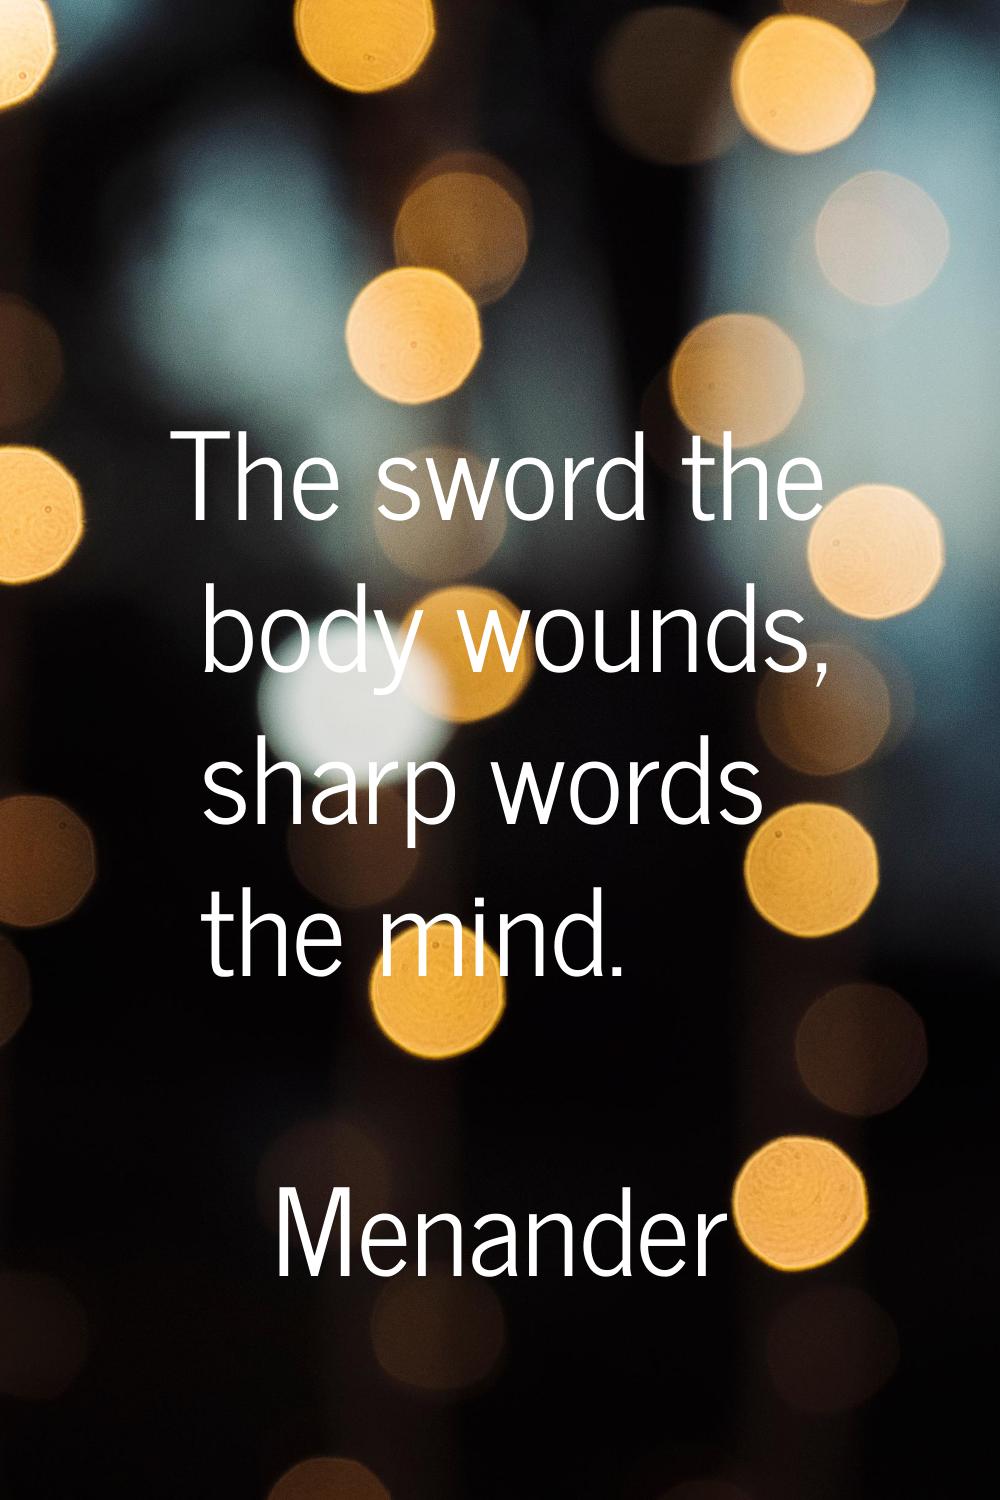 The sword the body wounds, sharp words the mind.